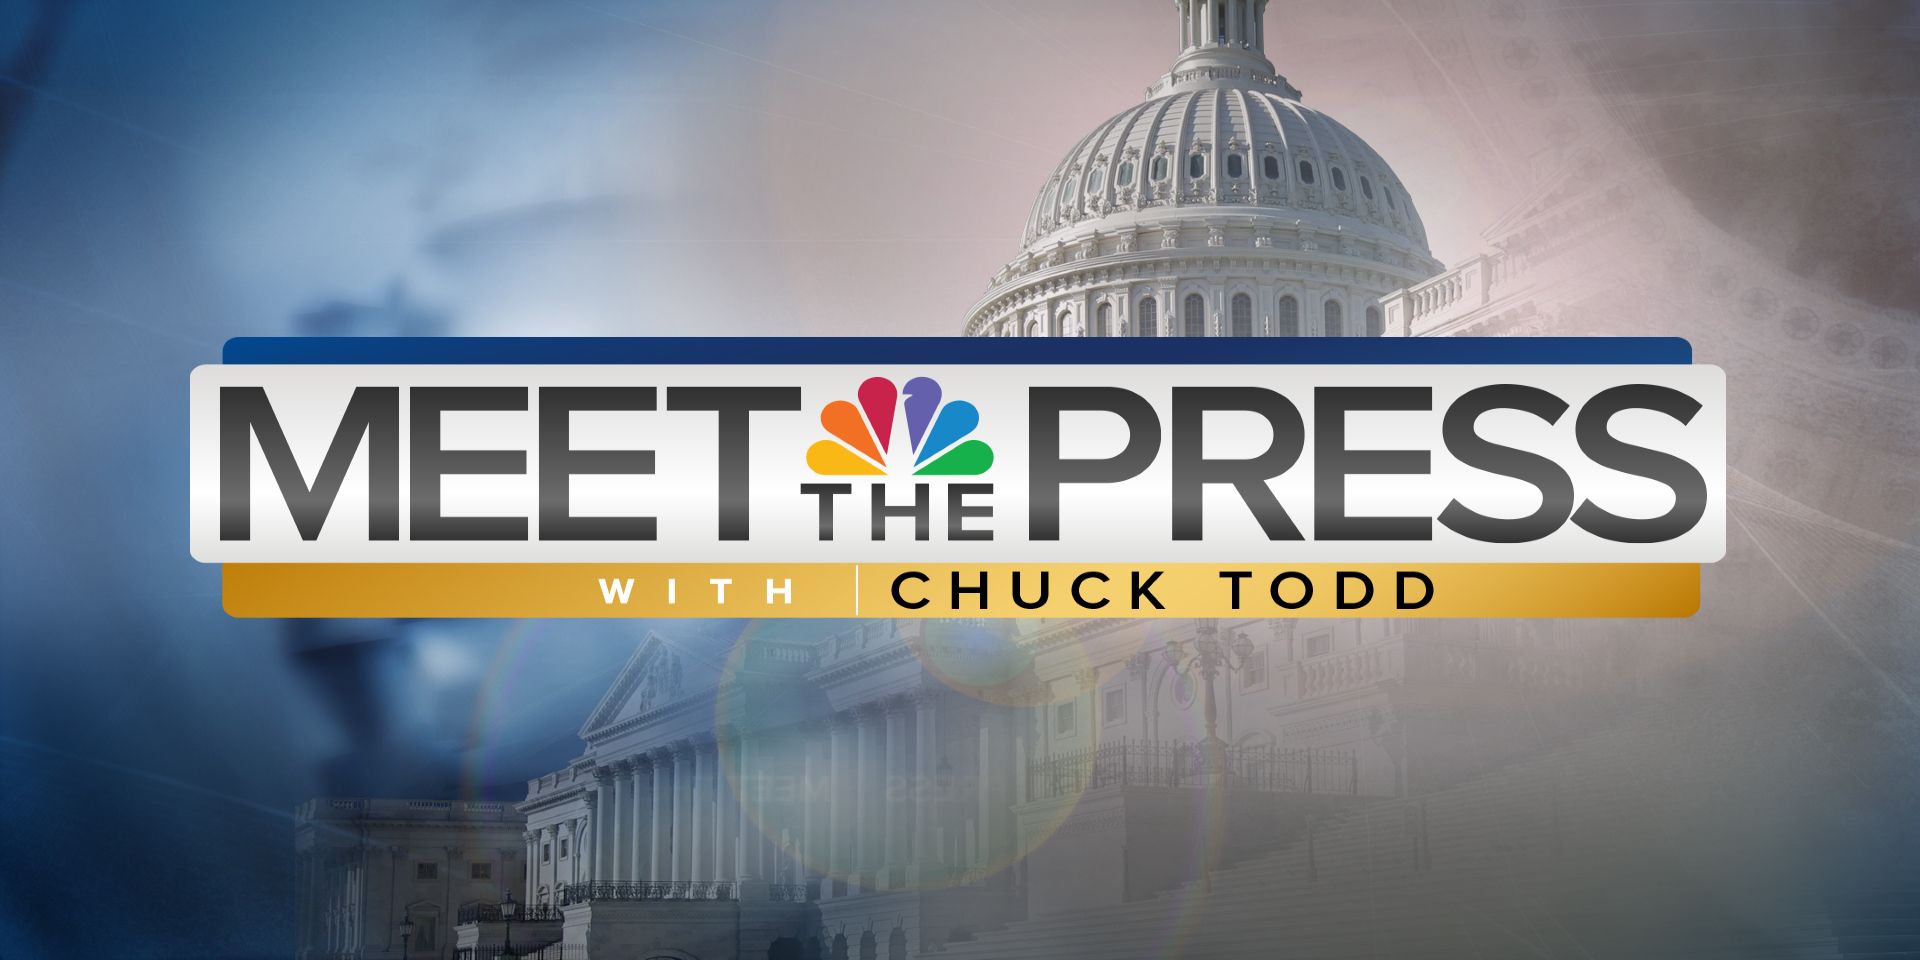 The logo for NBC's Meet The Press.